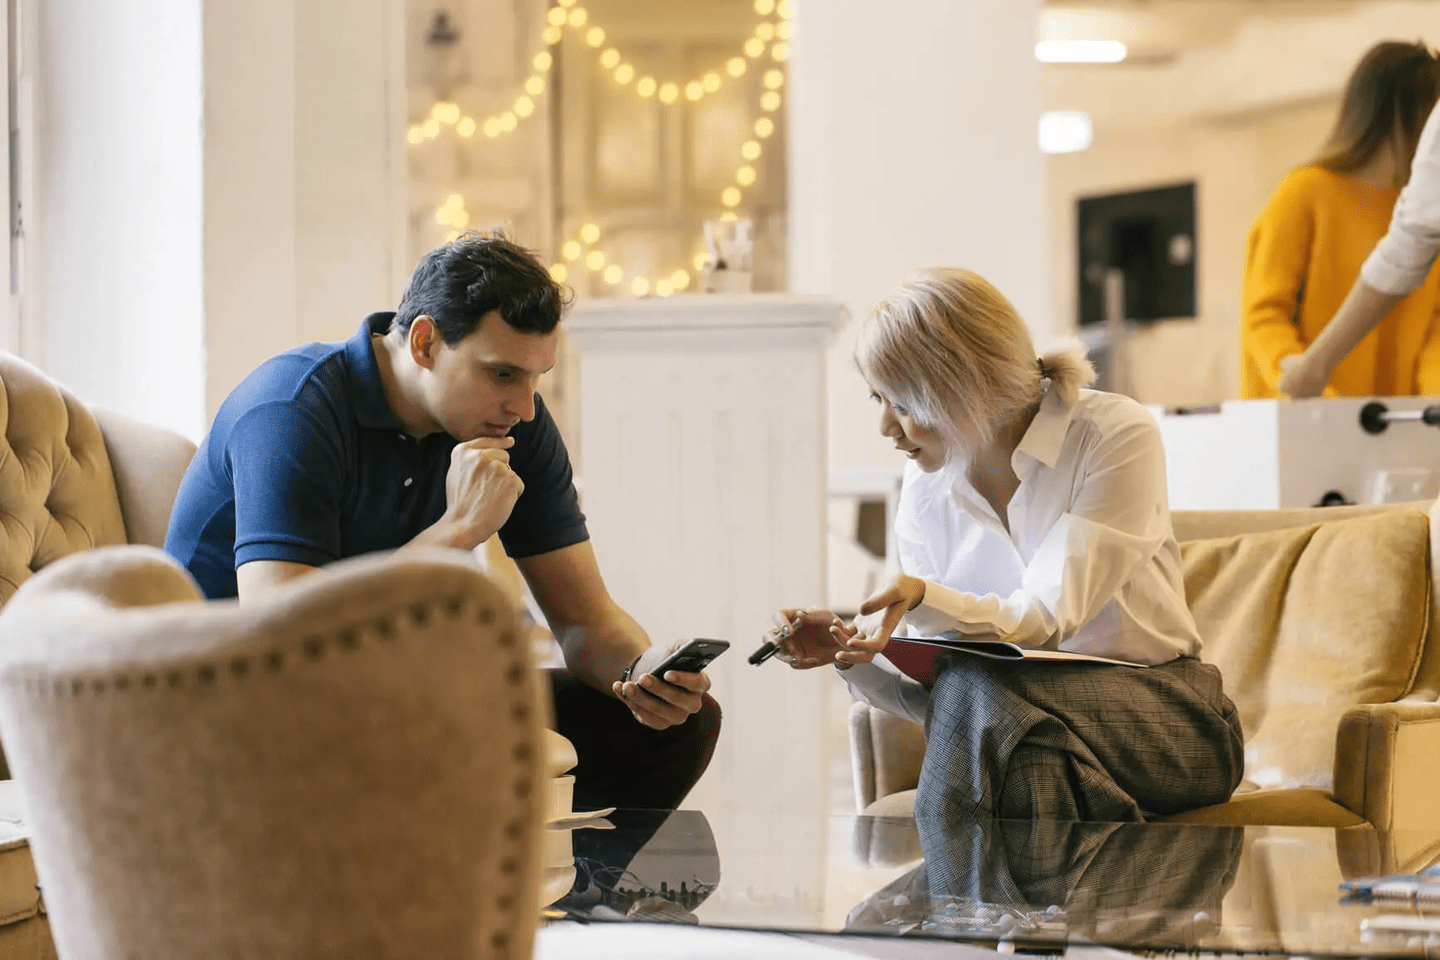 Two people talking while looking at phone